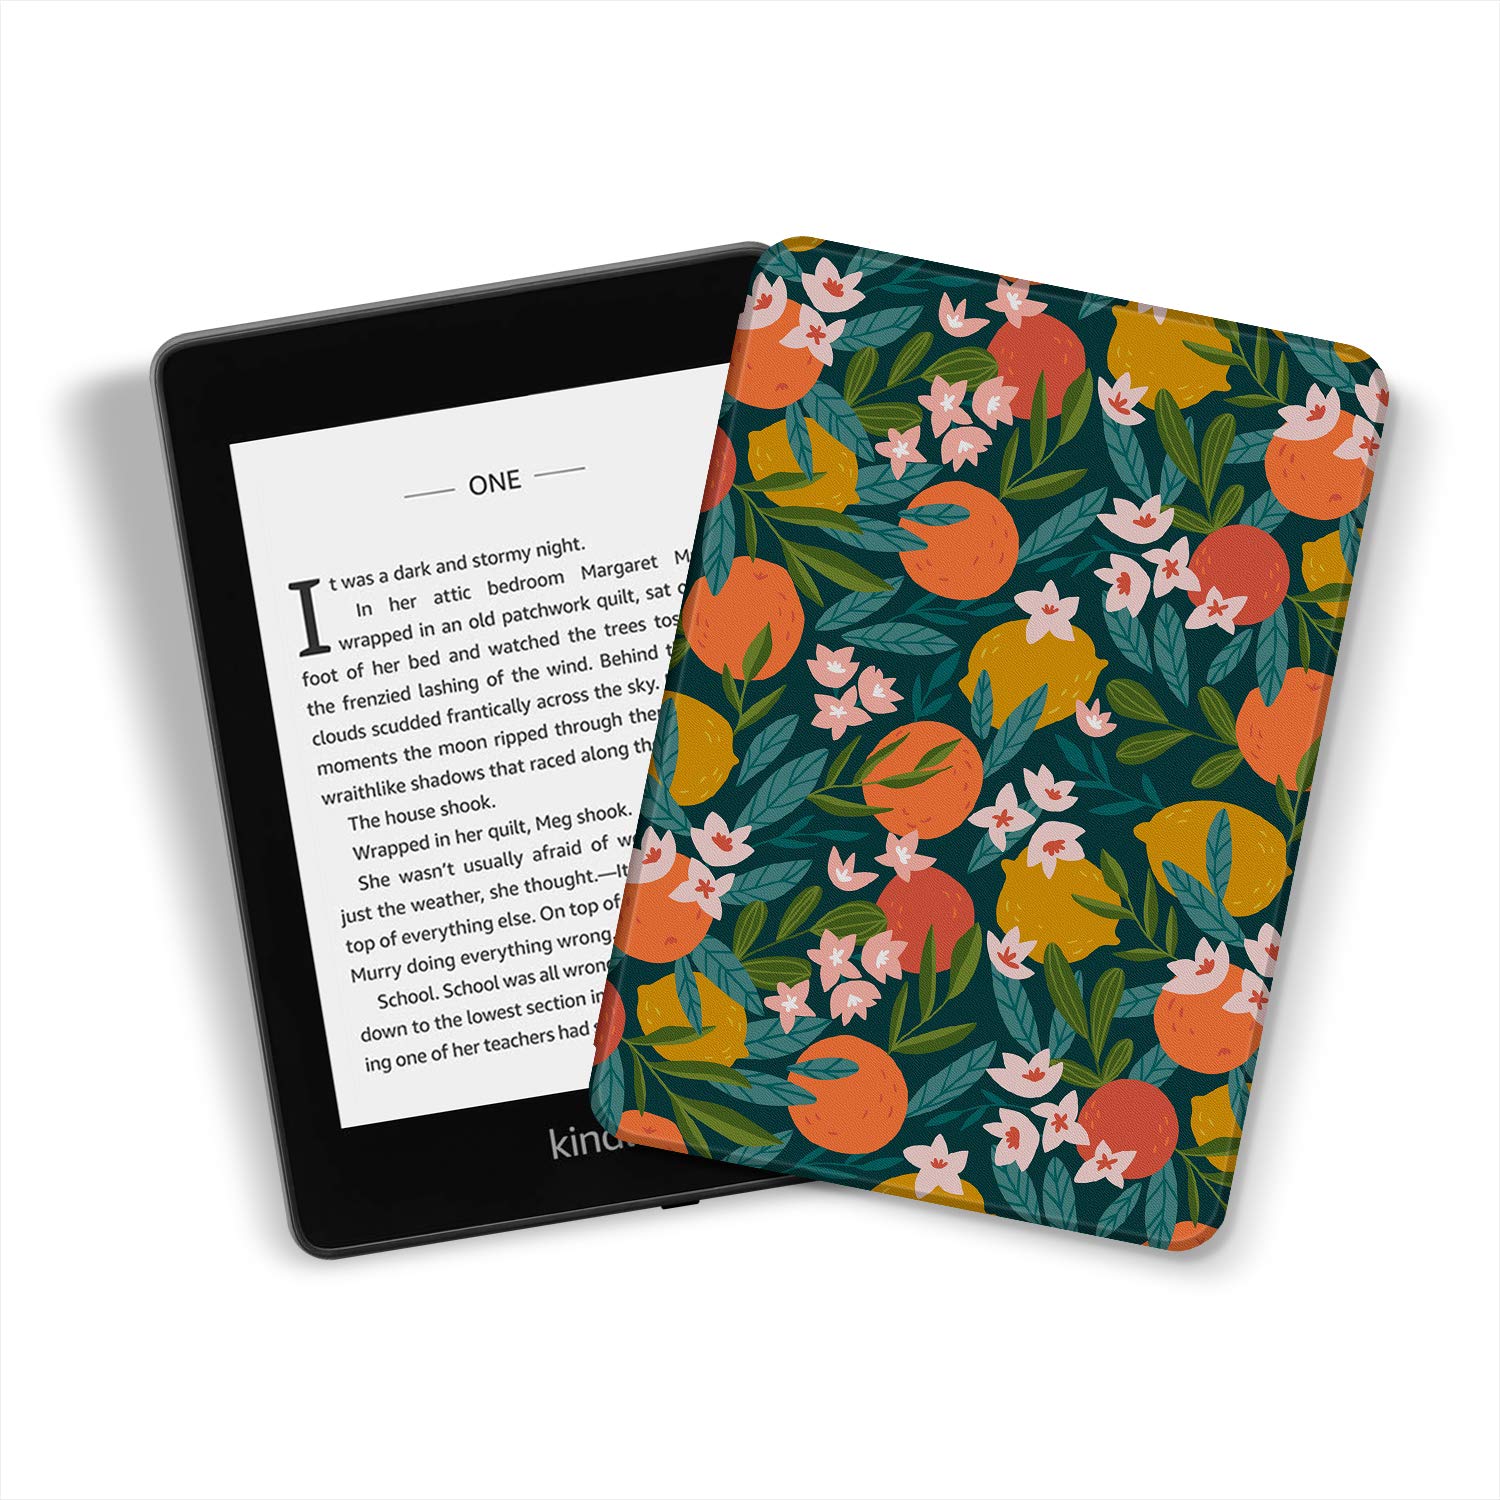 Ayotu Water-Safe Case for Kindle Paperwhite 2018 - PU Leather Smart Cover with Auto Wake/Sleep - Fits Amazon All-New Kindle Paperwhite Leather Cover (10th Generation-2018)，K10 The Flowers and Fruits